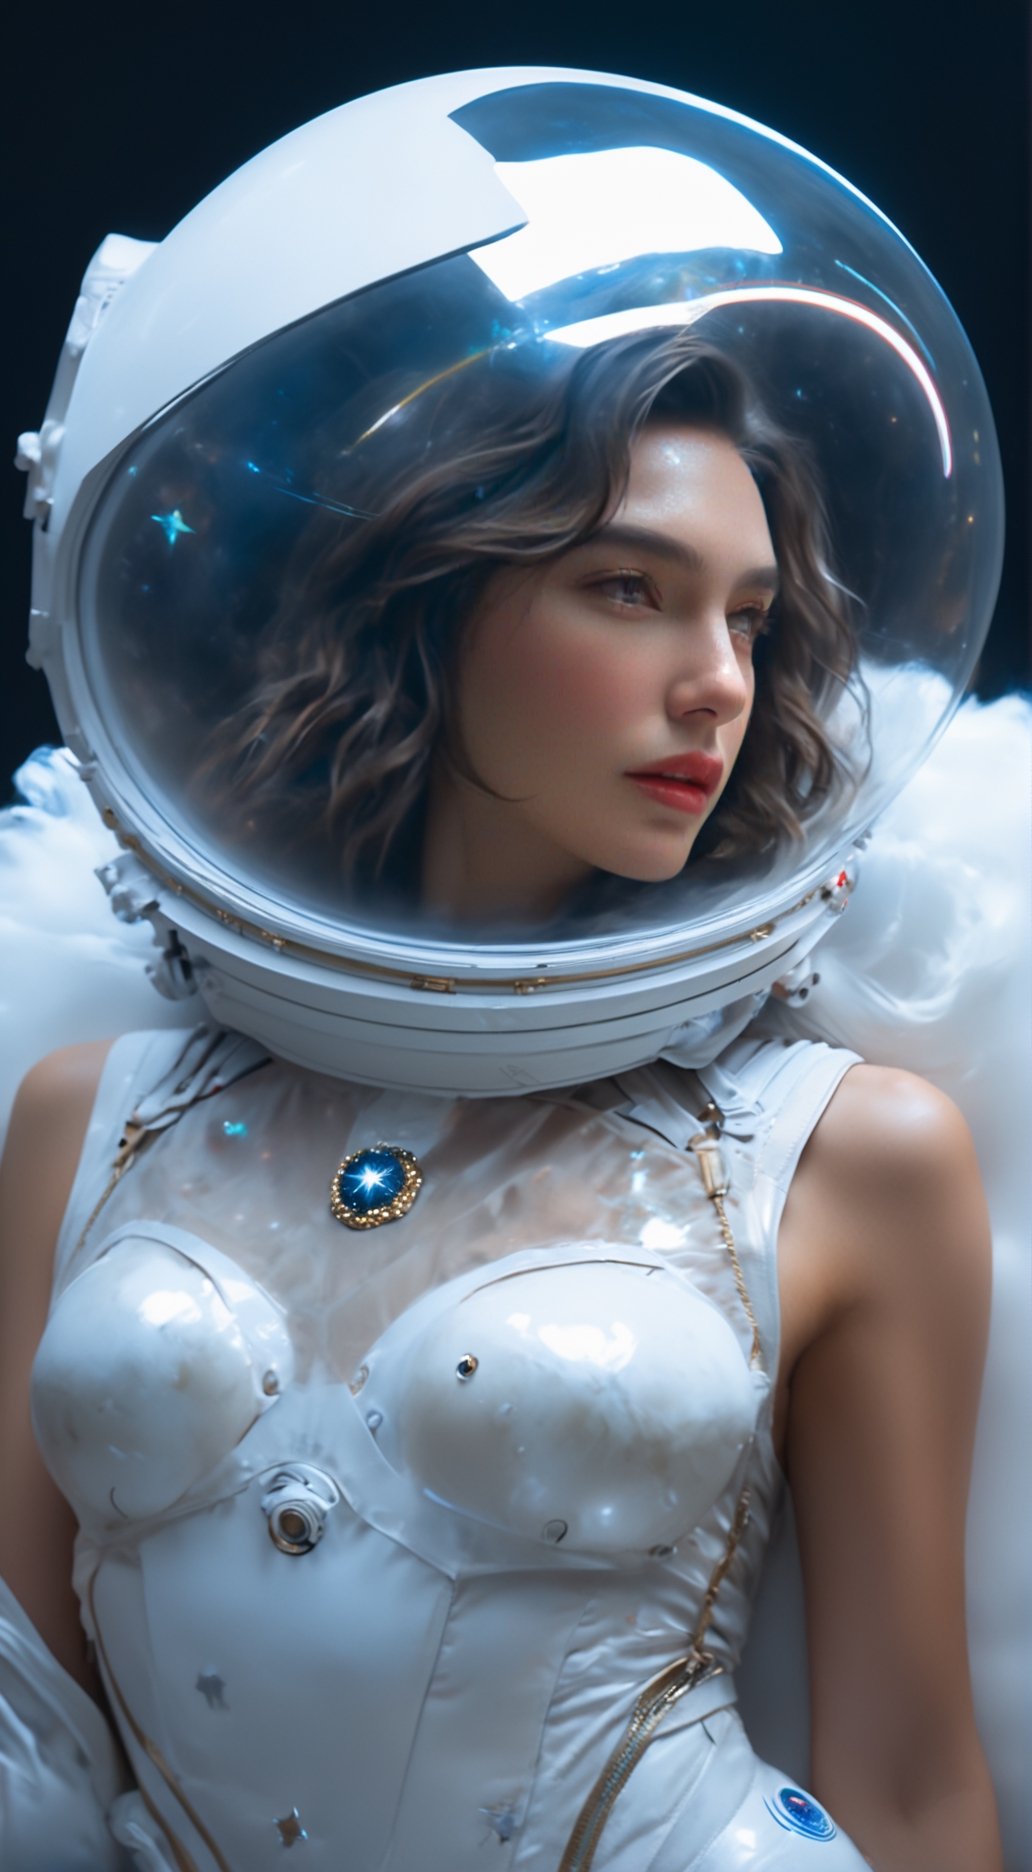 cinematic photo, 4k photo, extremely detail, gal gadot, floating in space, between the star, holding glowing globe moon, ((full astronat helmet)), ((sexy)), transparent astronat clothes, white, full body, pretty face, closeup shot ,painting by jakub rozalski,